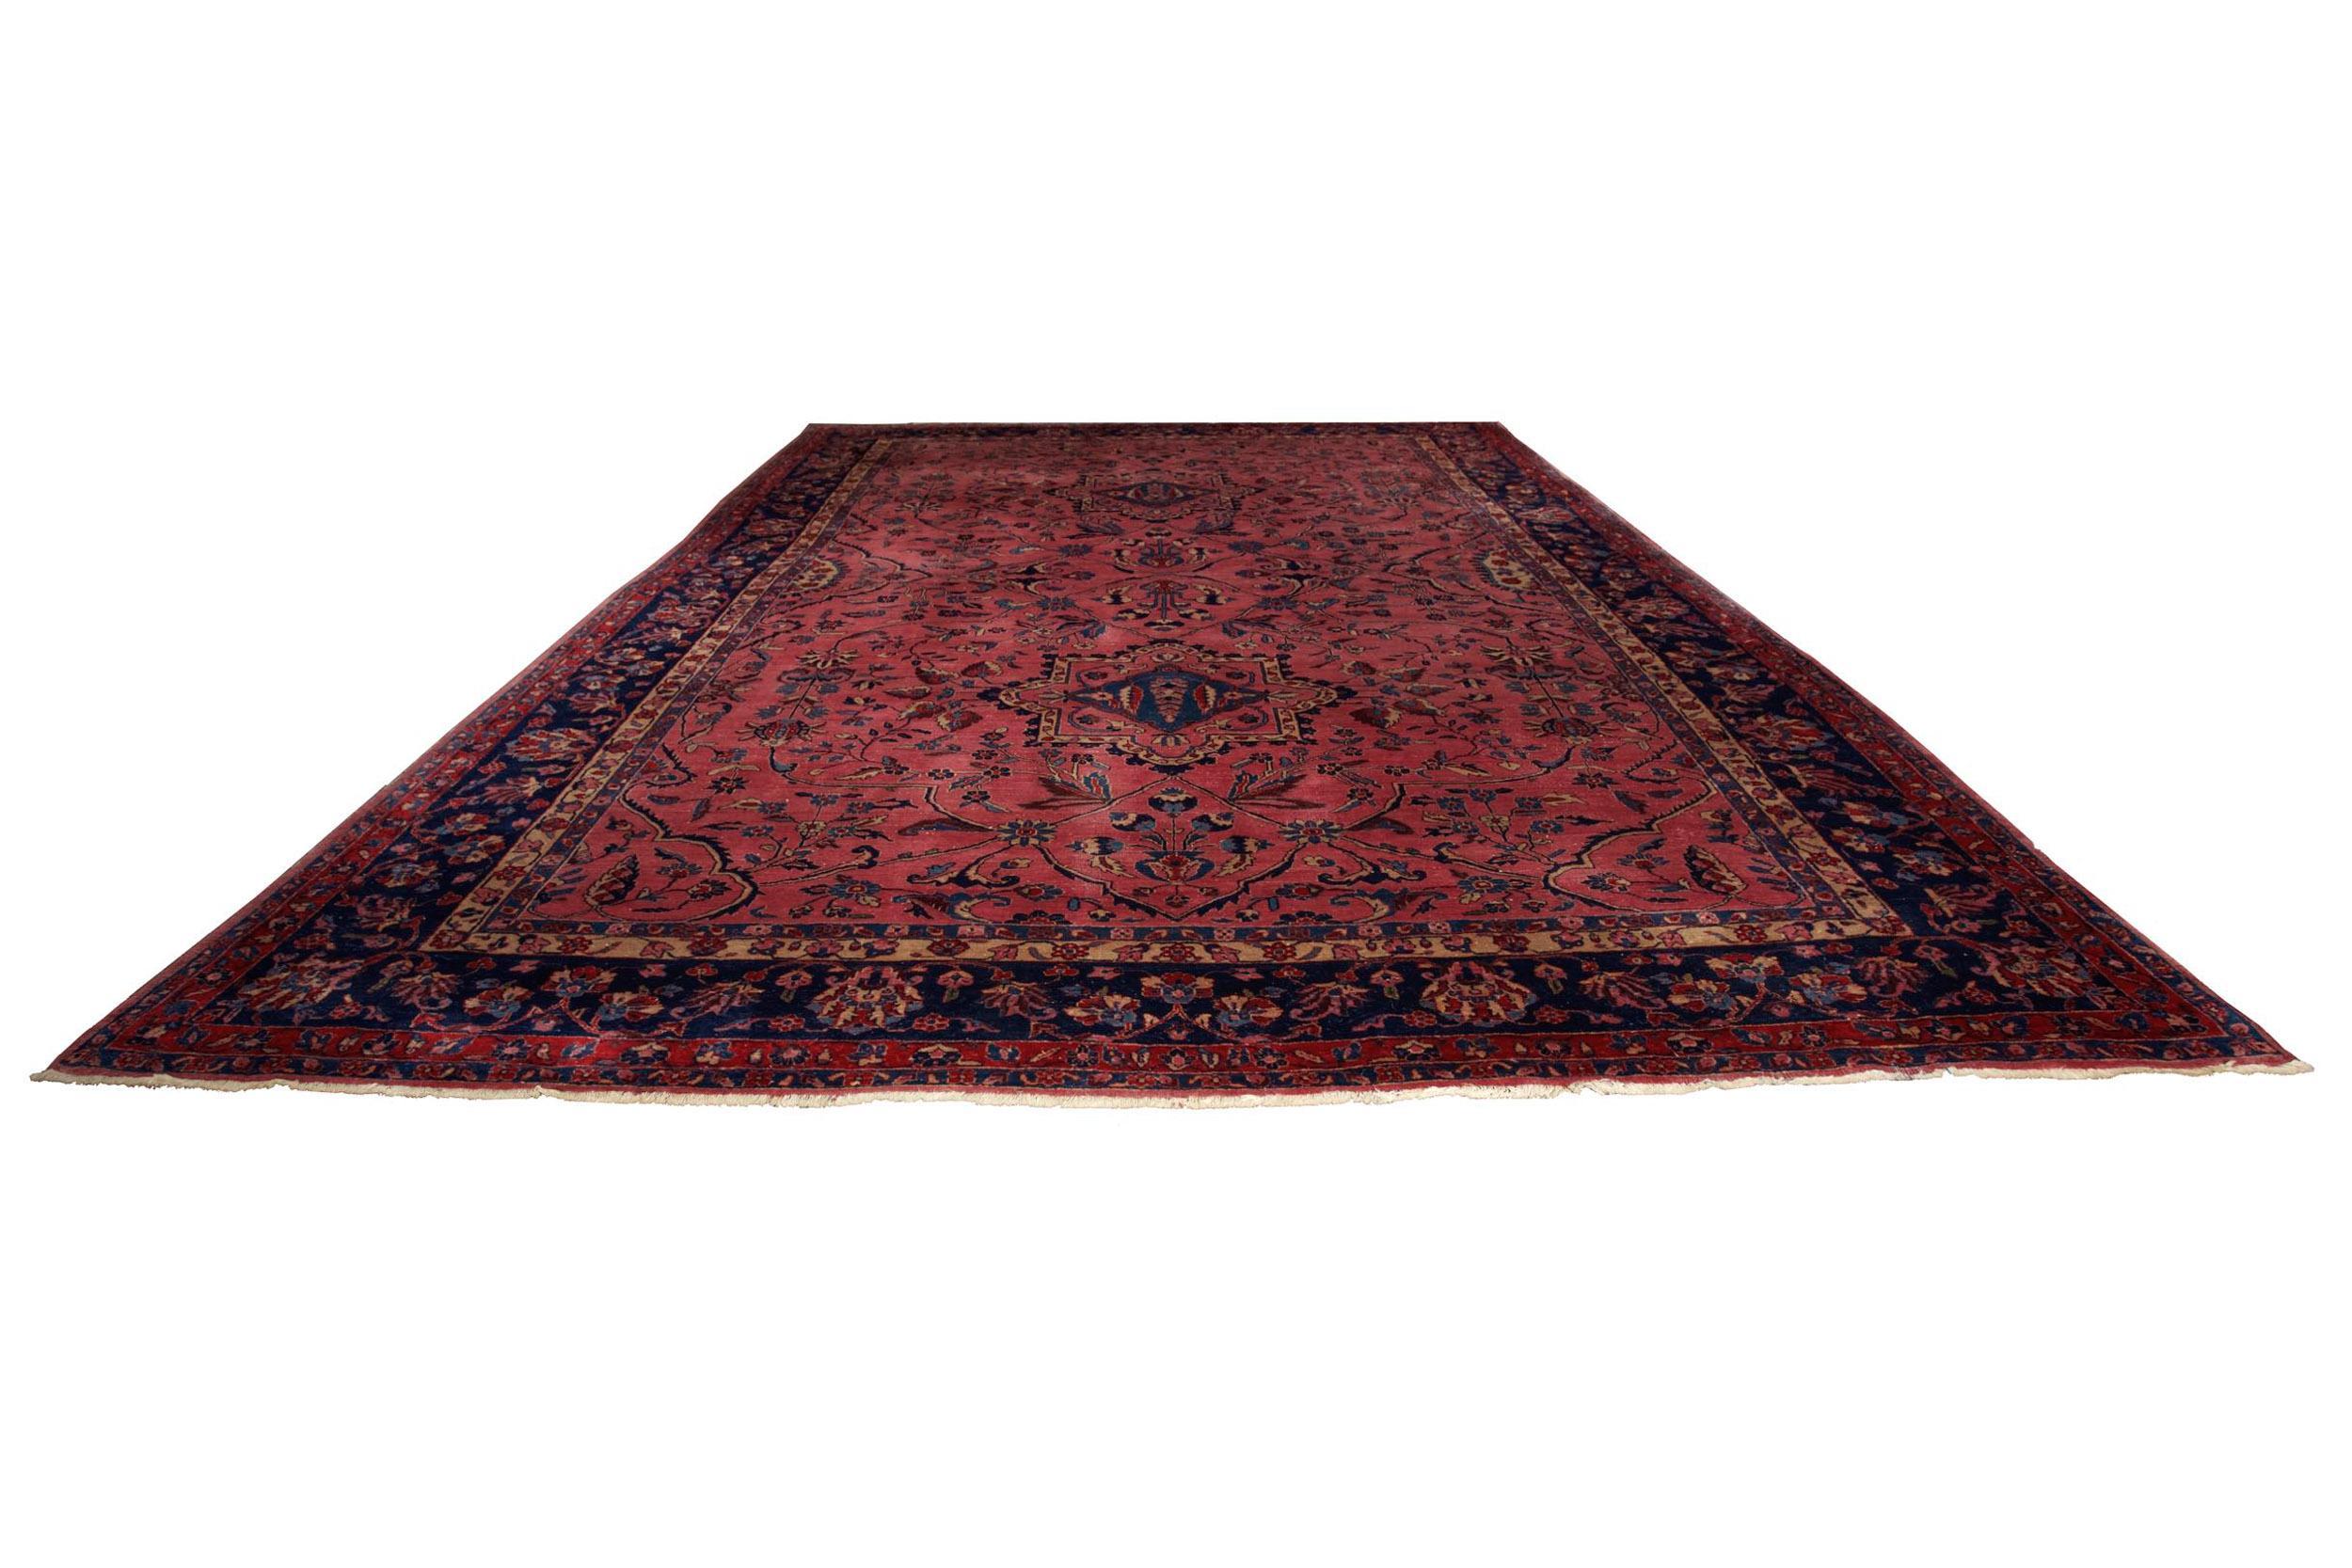 Circa 1920s Antique Room Size Purple Sarouk 13.7' x 9.4'
Item # C1021021

A strong statement piece, this gorgeous room-size Sarouk carpet features a rich overall magenta and purple ground that is most striking. The angular stylized floral designs